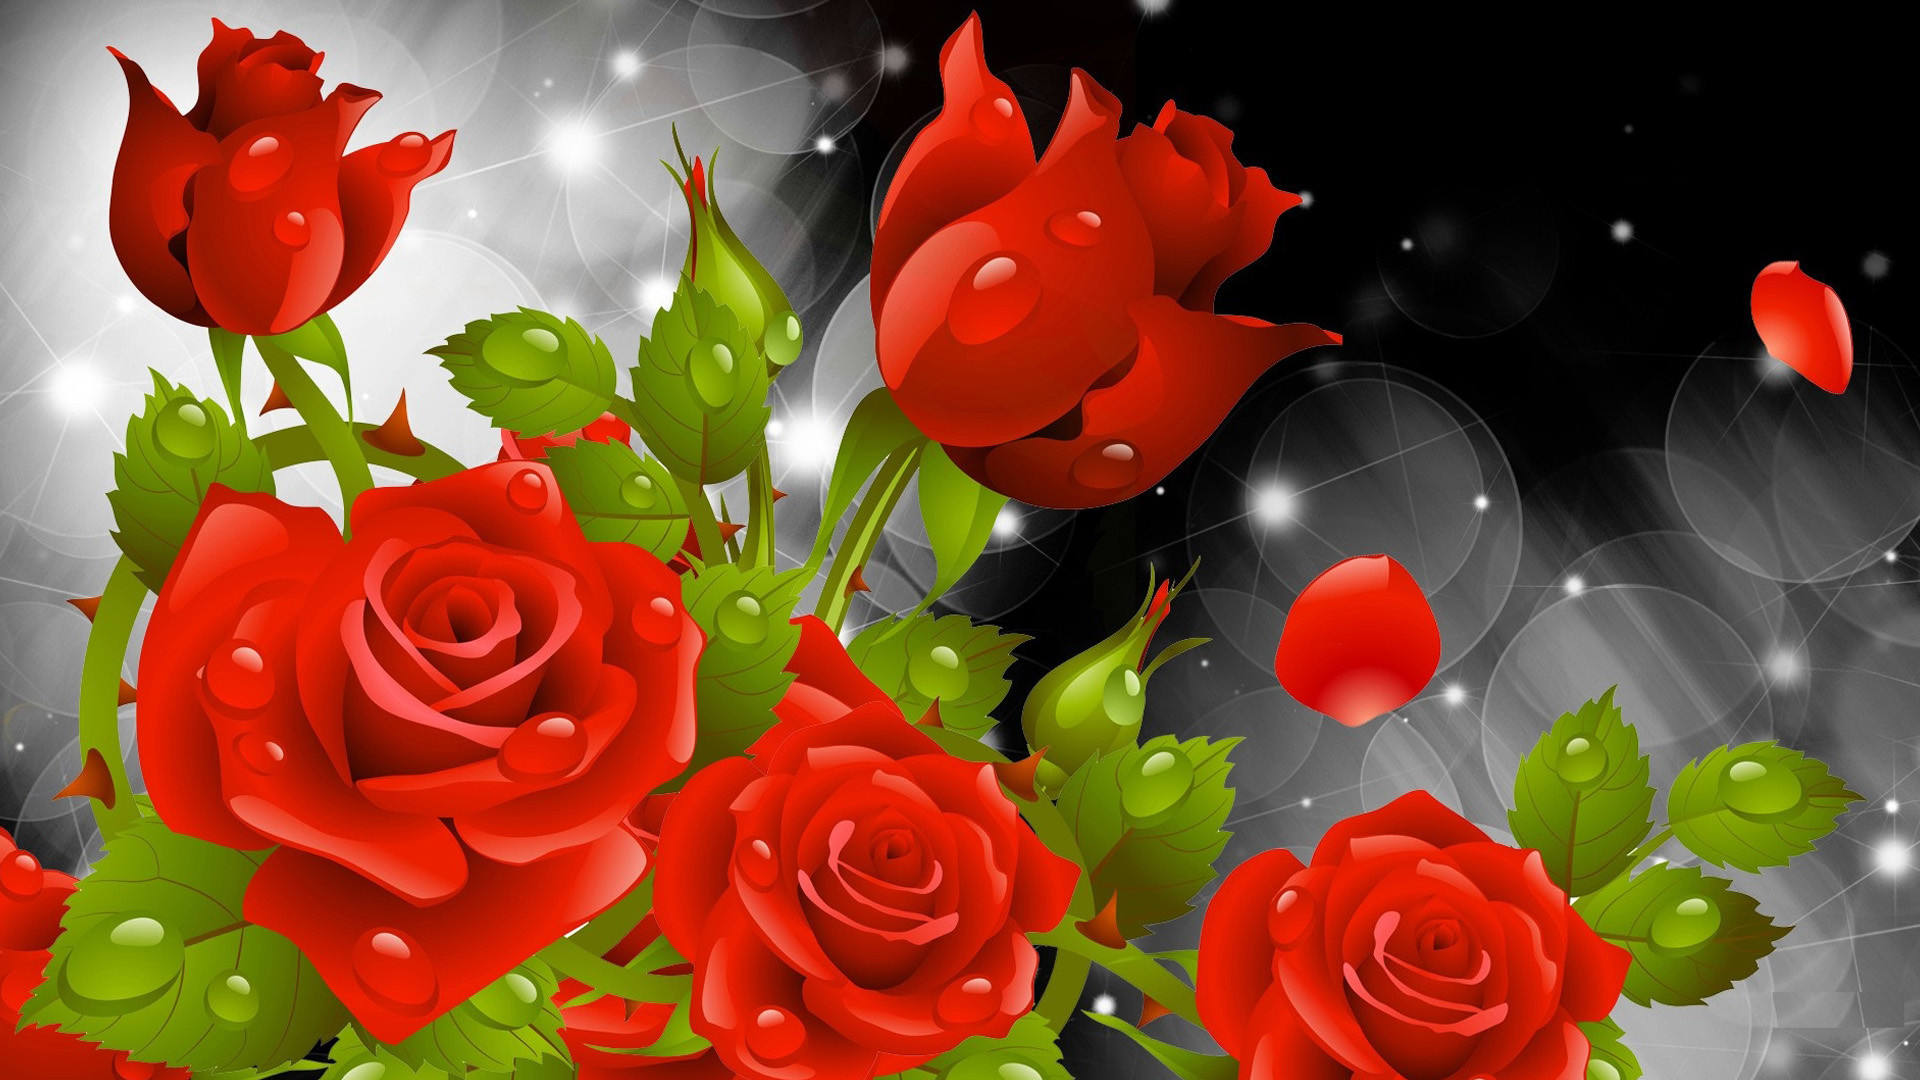 1920x1080 Red Rose Pics Wallpapers (36 Wallpapers)